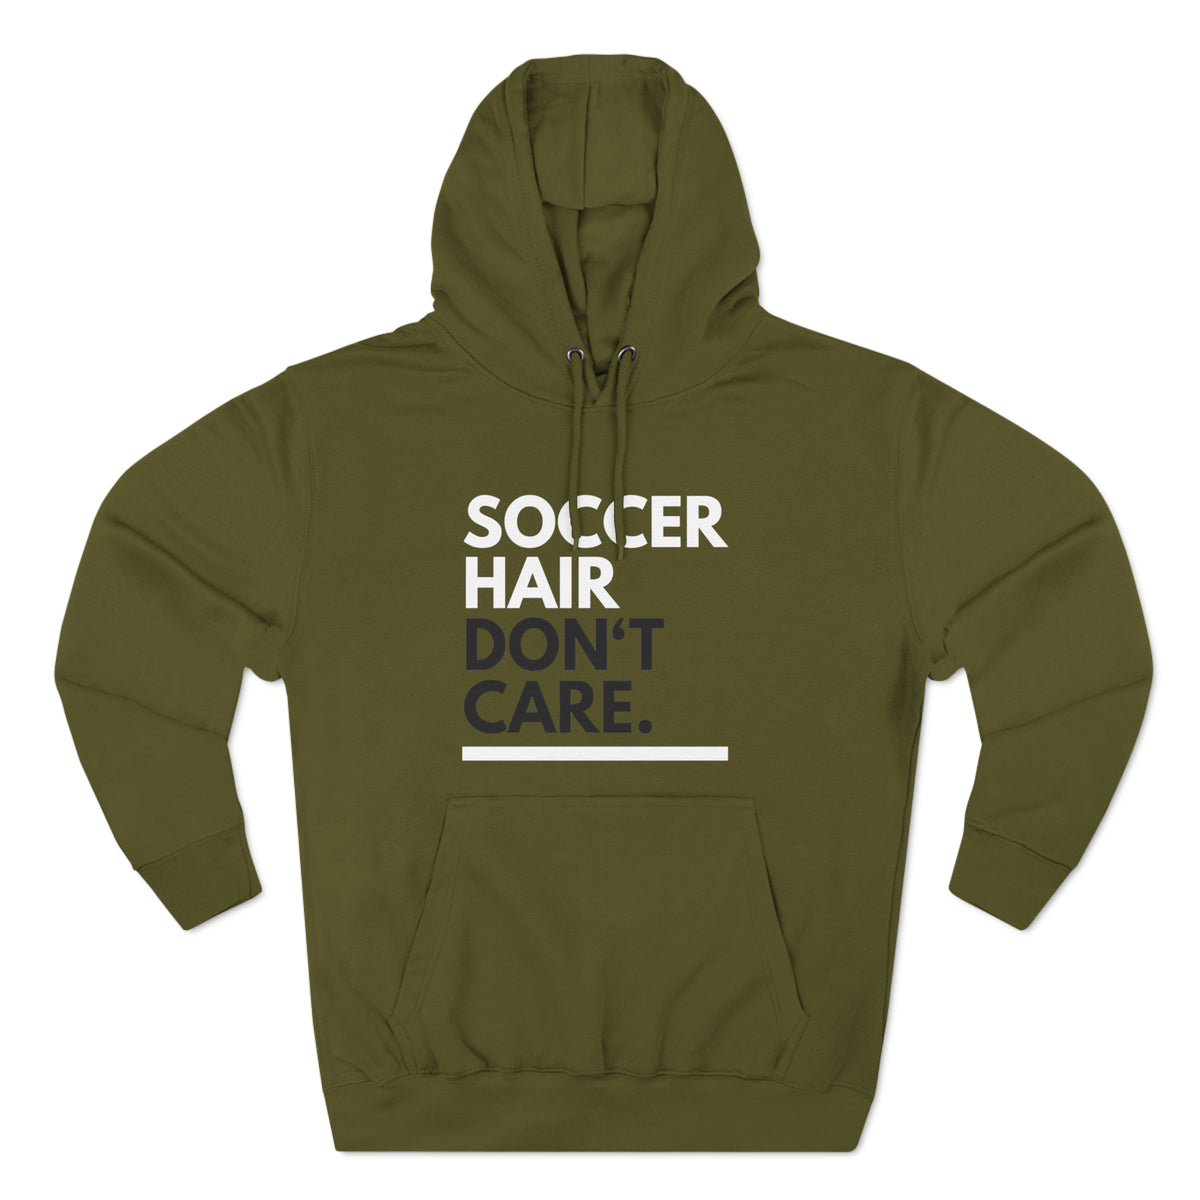 Soccer Hair Don't Care Adult Hooded Sweatshirt